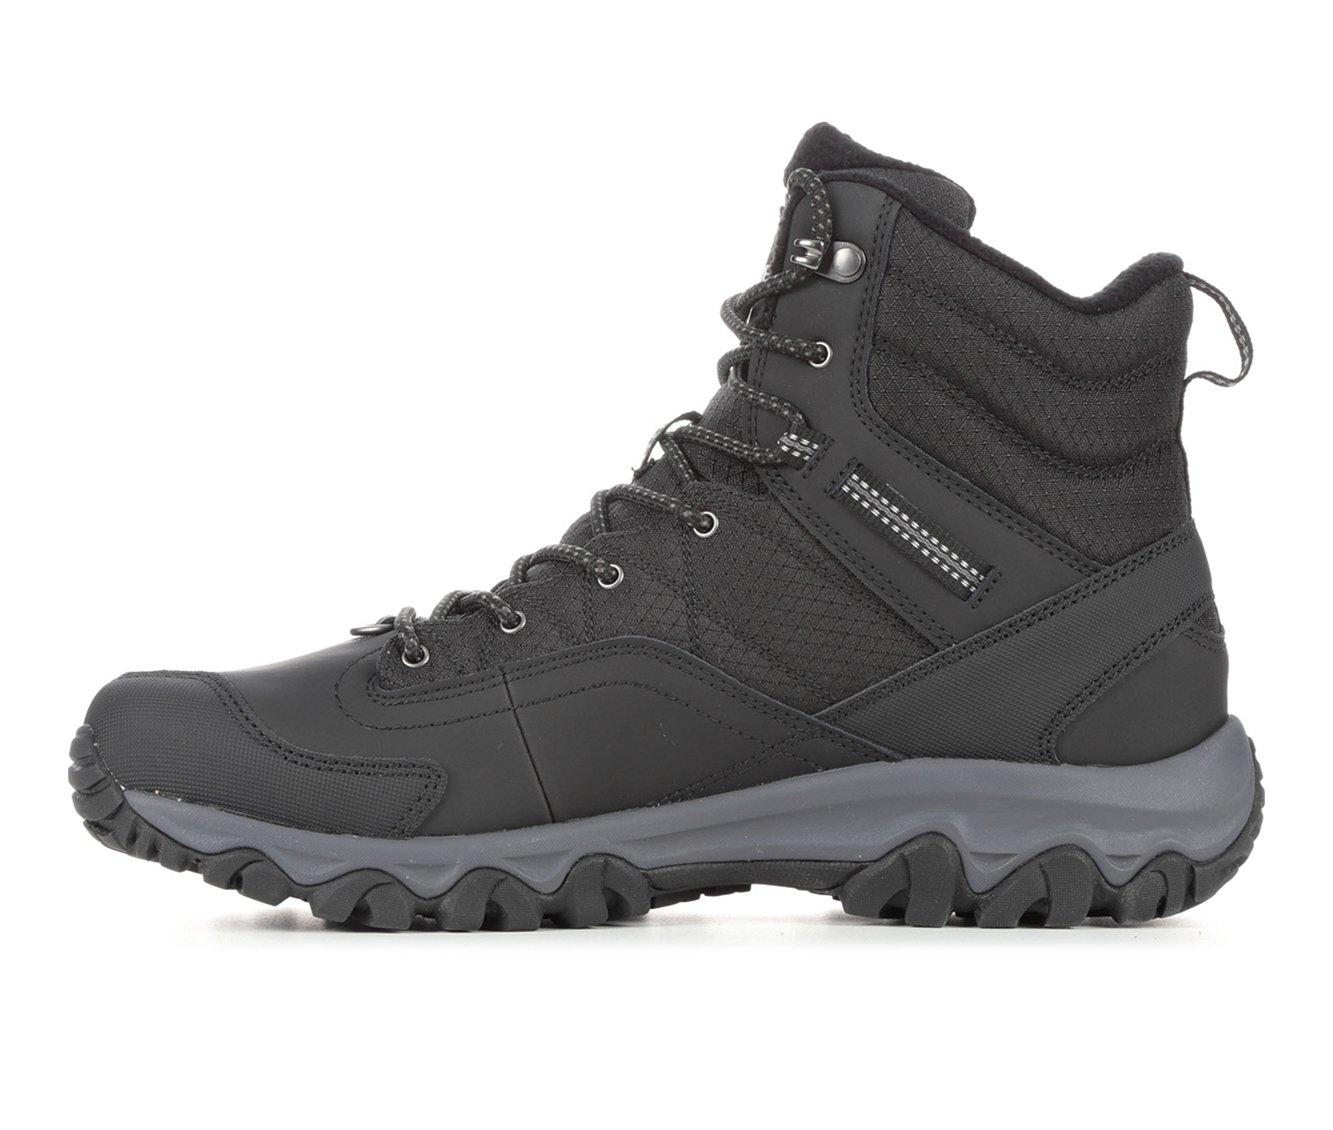 Excellent quality Best Sale Men's Merrell Thermo Akita Mid Waterproof ...